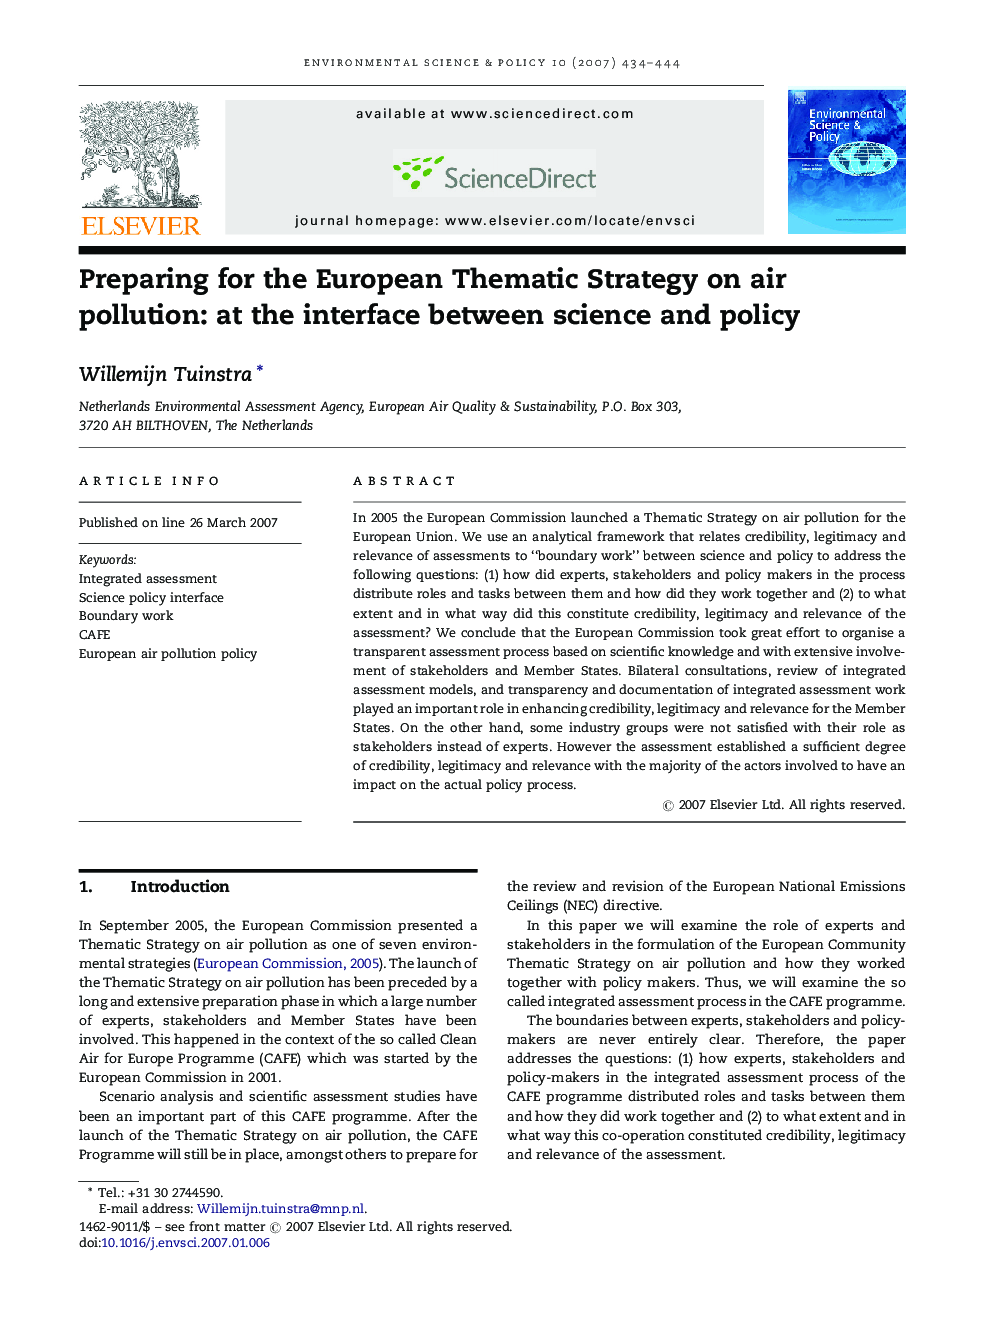 Preparing for the European Thematic Strategy on air pollution: at the interface between science and policy